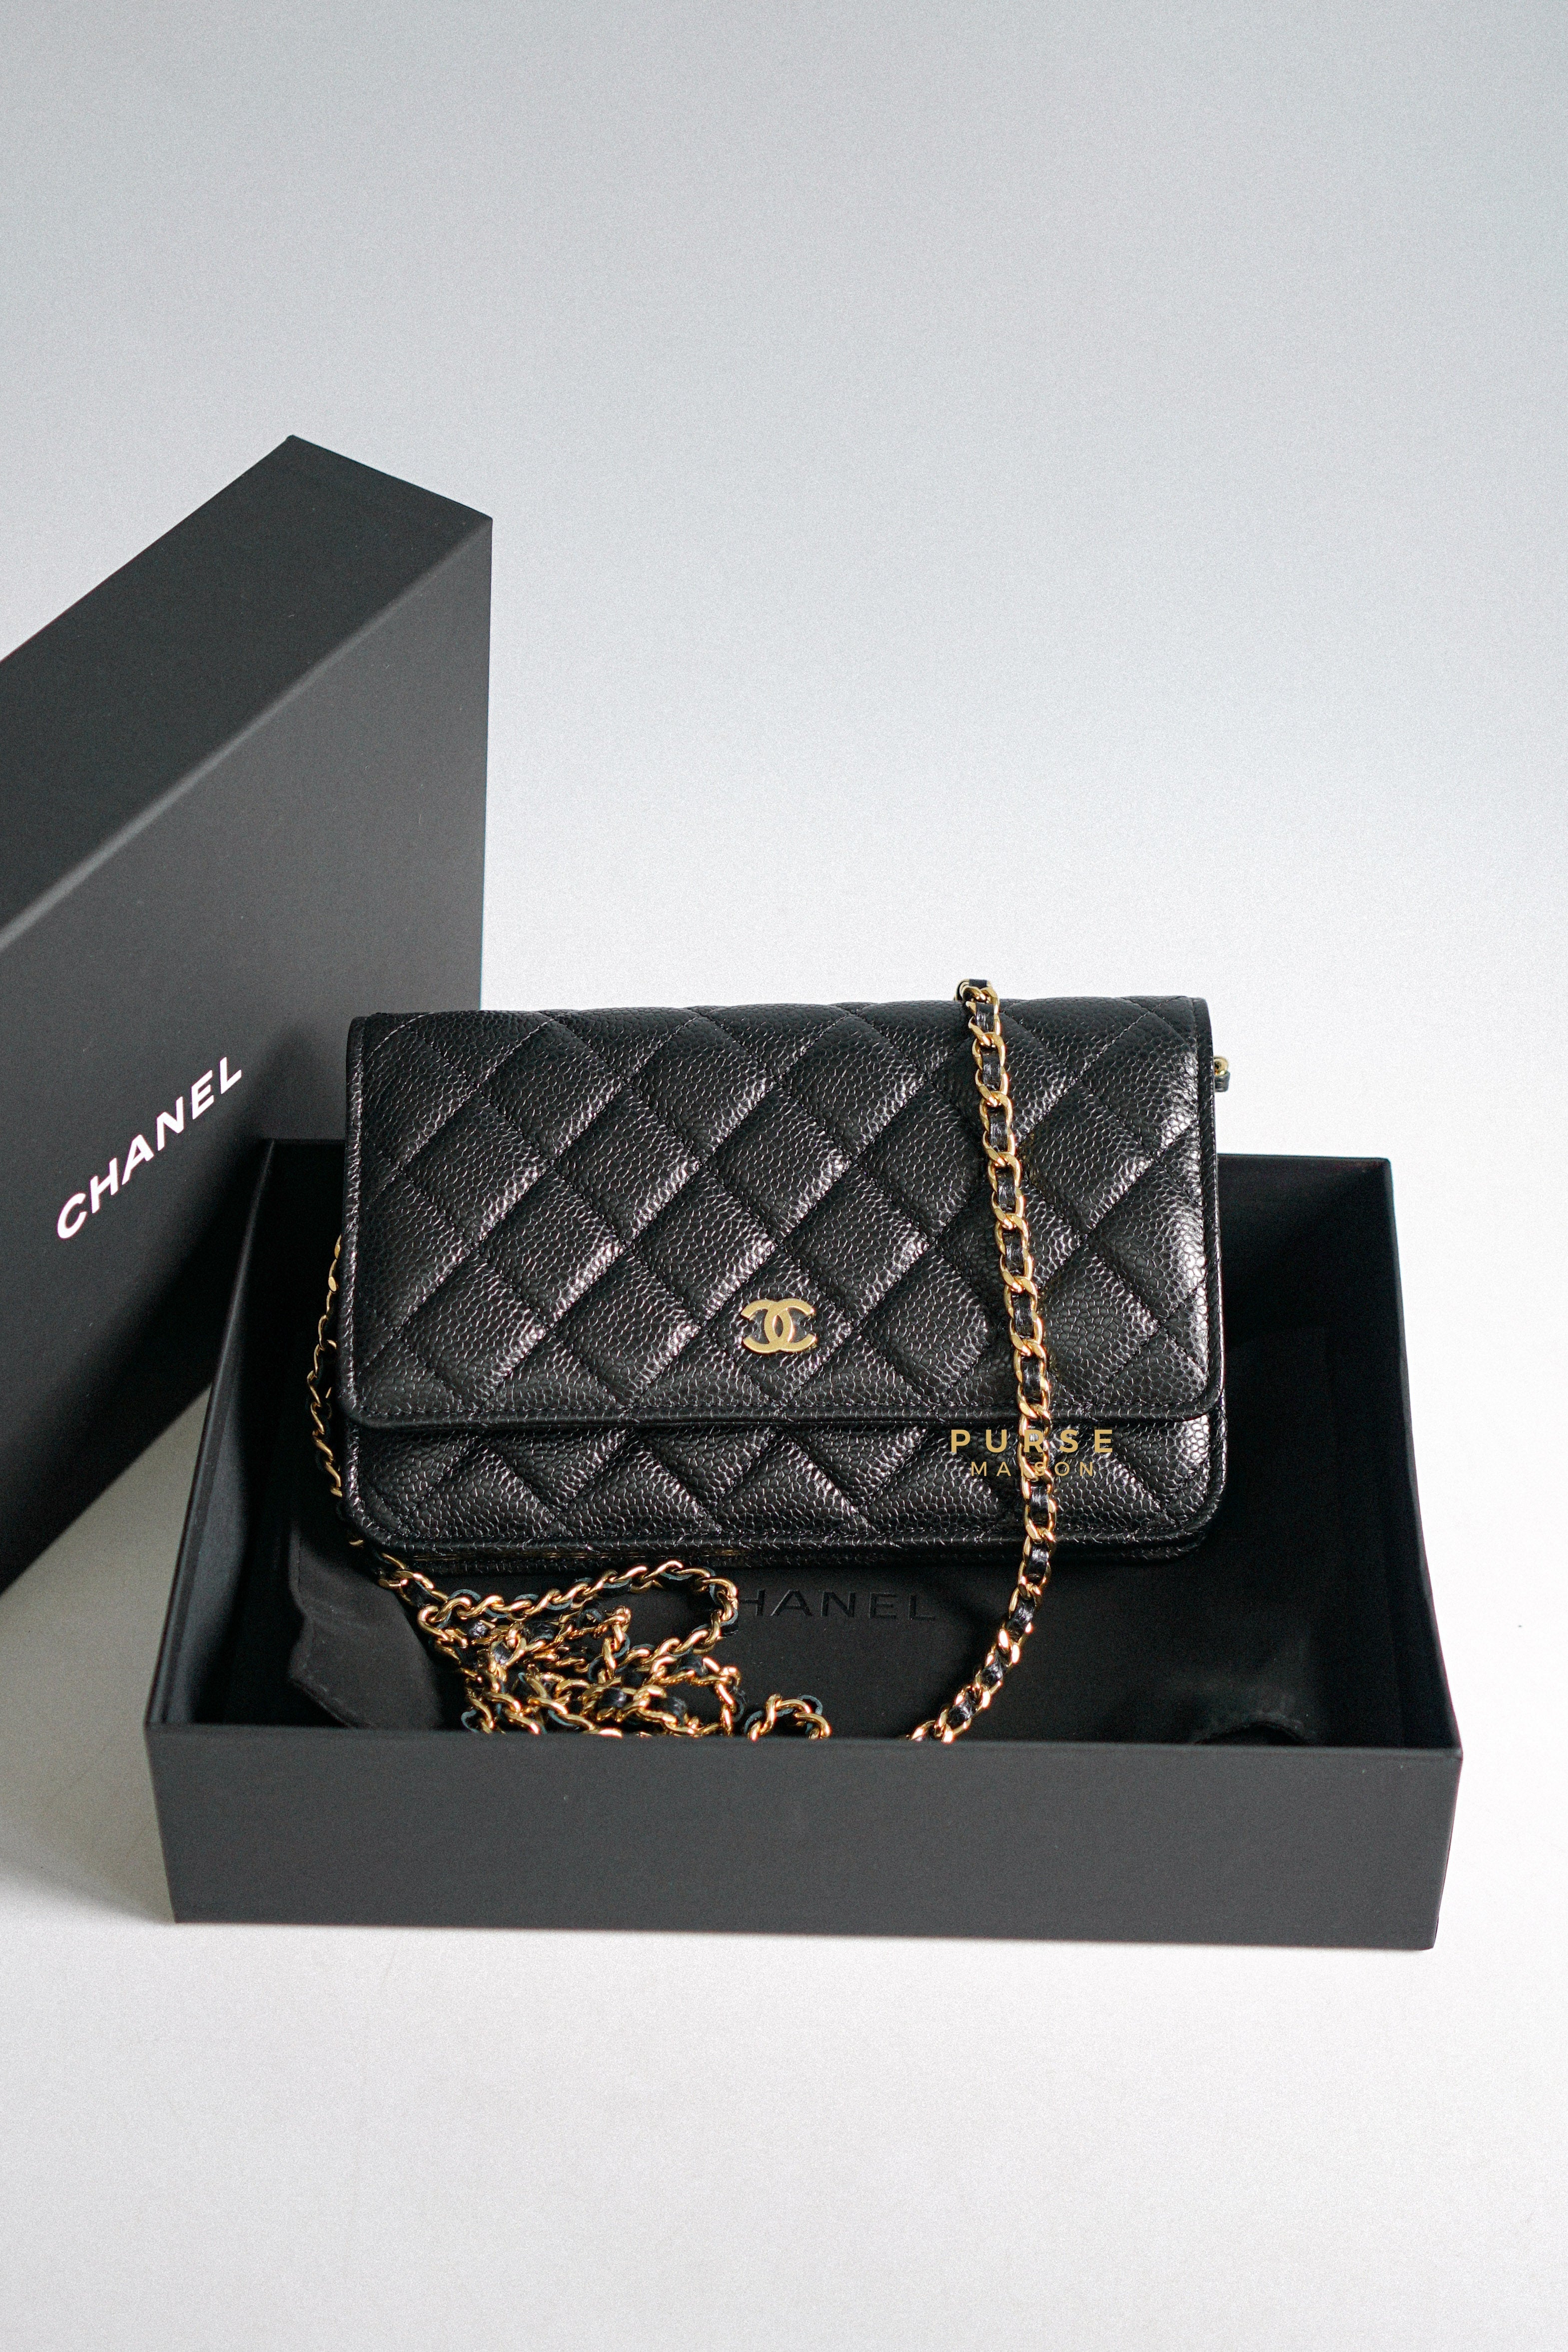 CHANEL CLASSIC WALLET ON CHAIN (MICROCHIP P7P3xxxx) BLACK CAVIAR, GOLD  HARDWARE, WITH DUST COVER & BOX